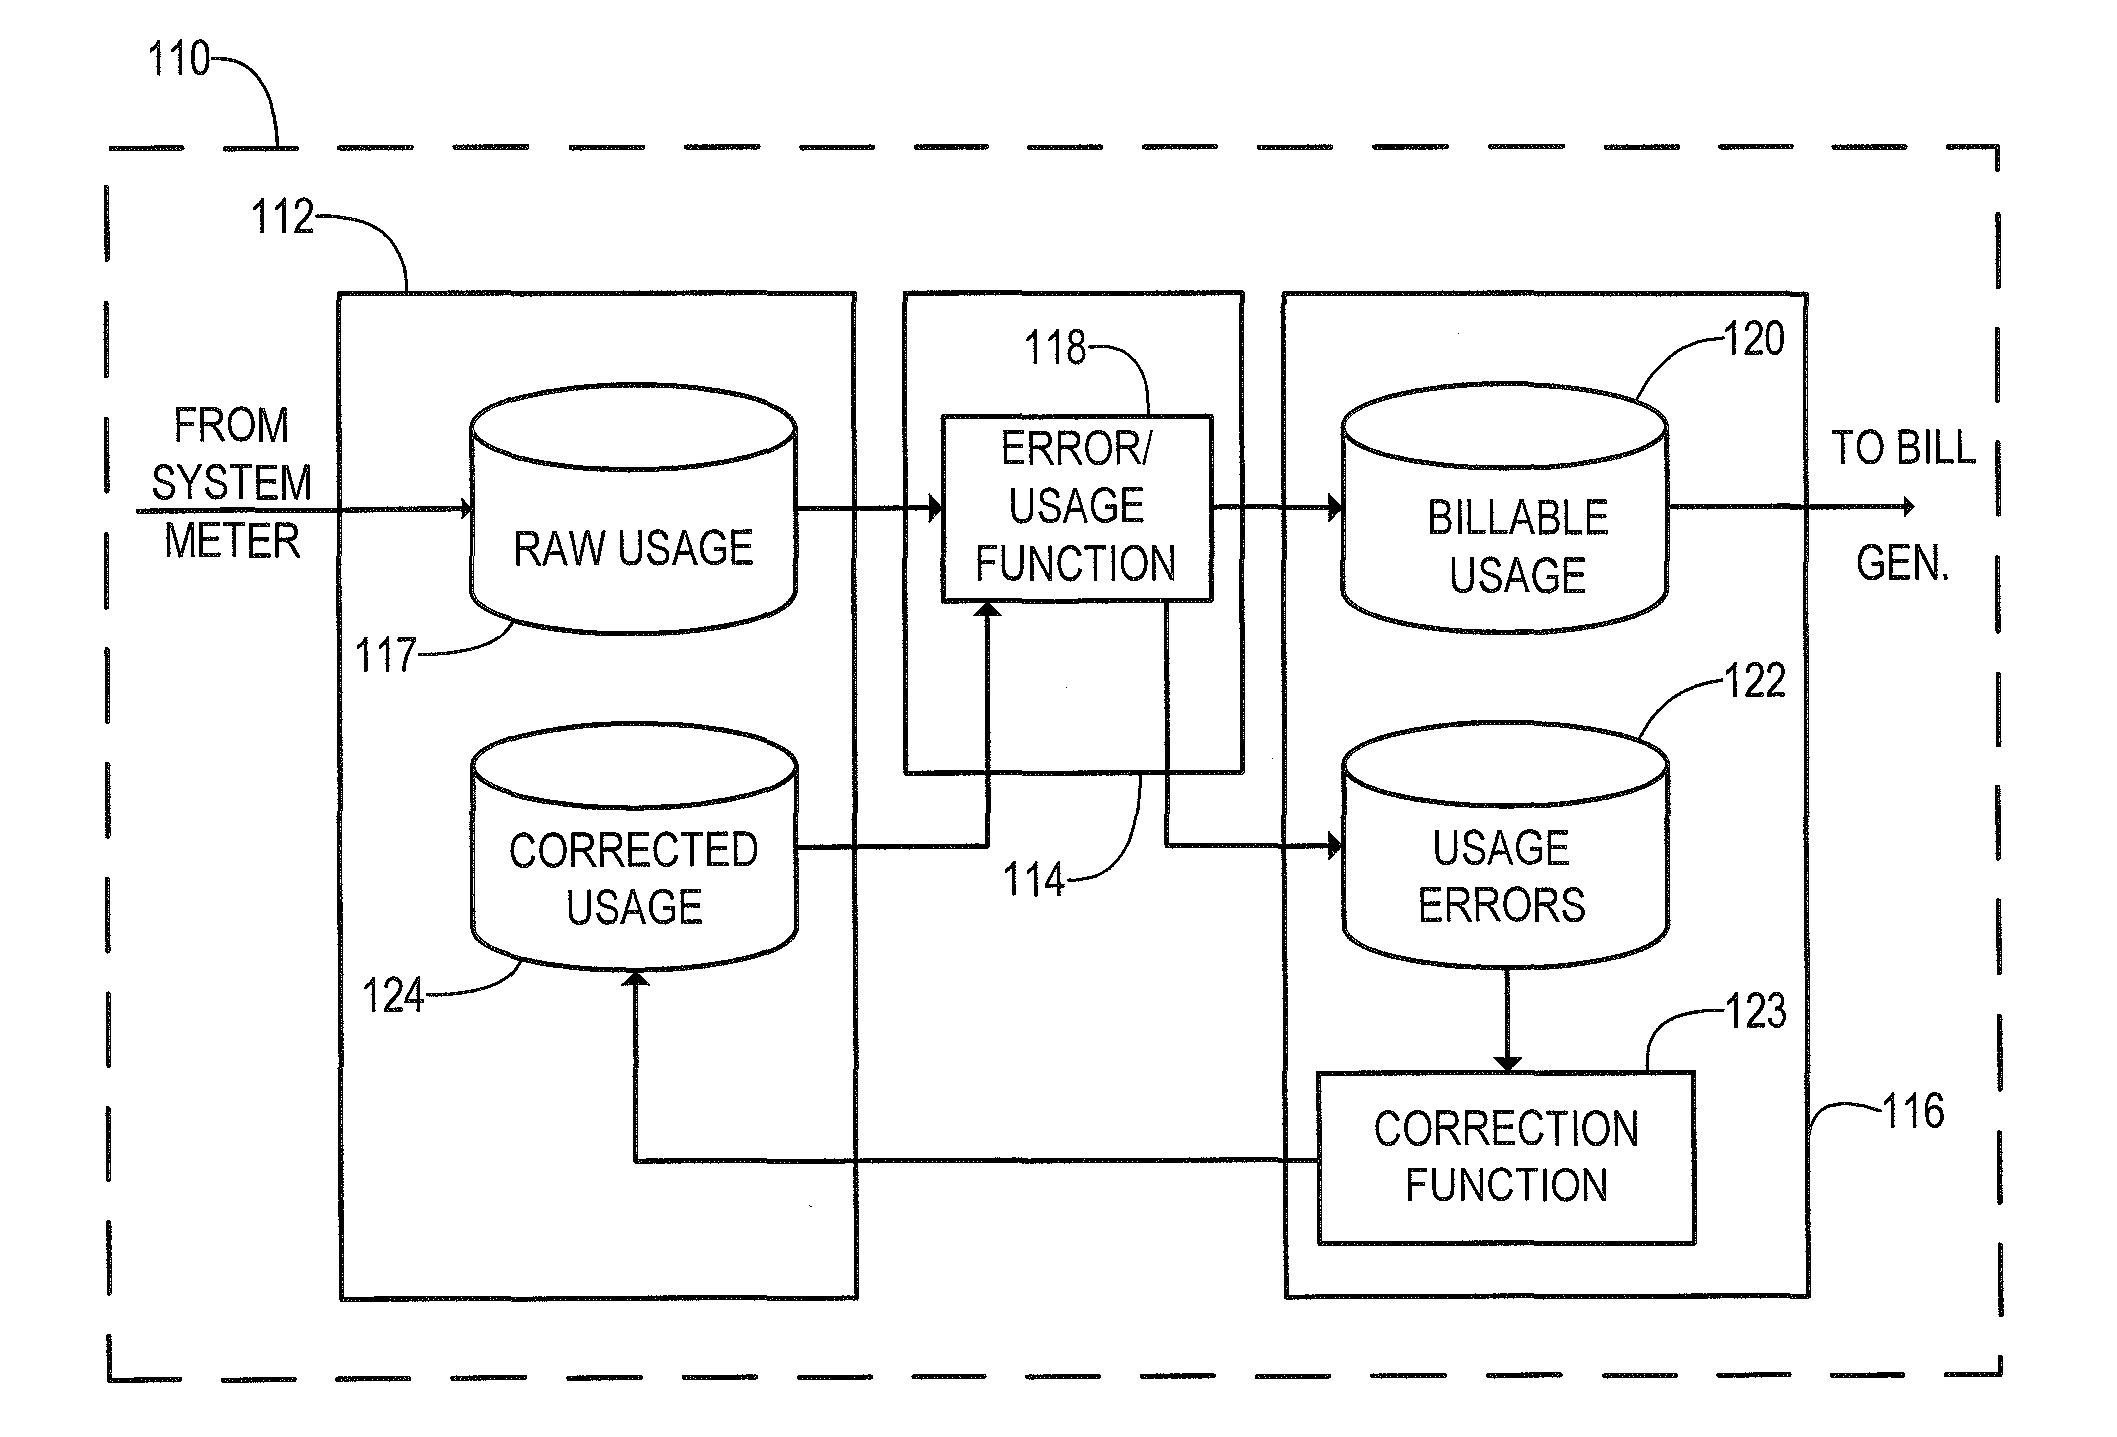 Method and system for server-based error processing in support of legacy-based usage and billing systems